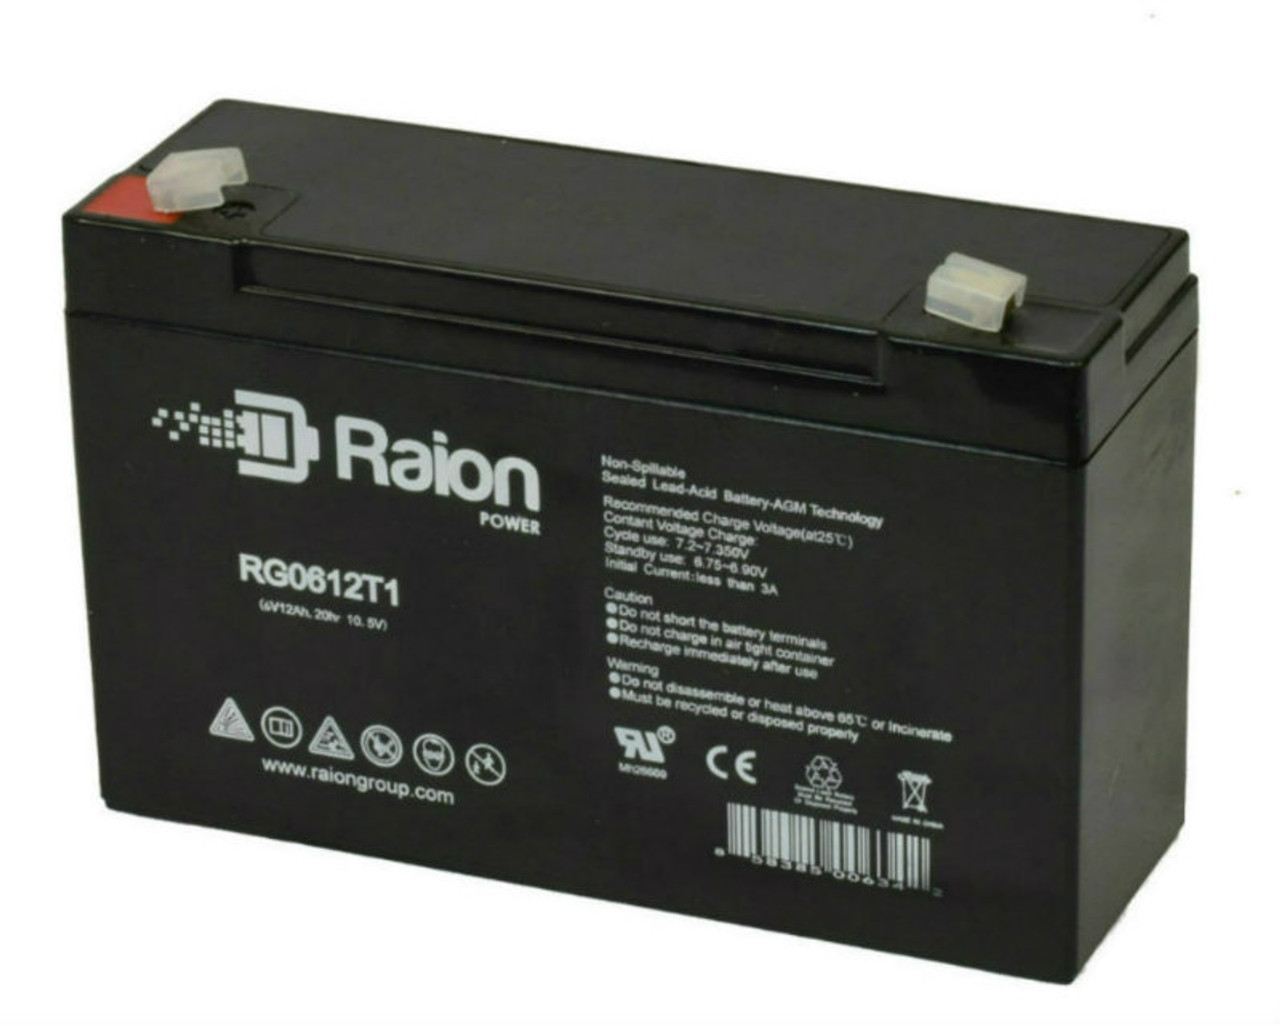 Raion Power RG06120T1 Replacement Battery for Mule PM6100